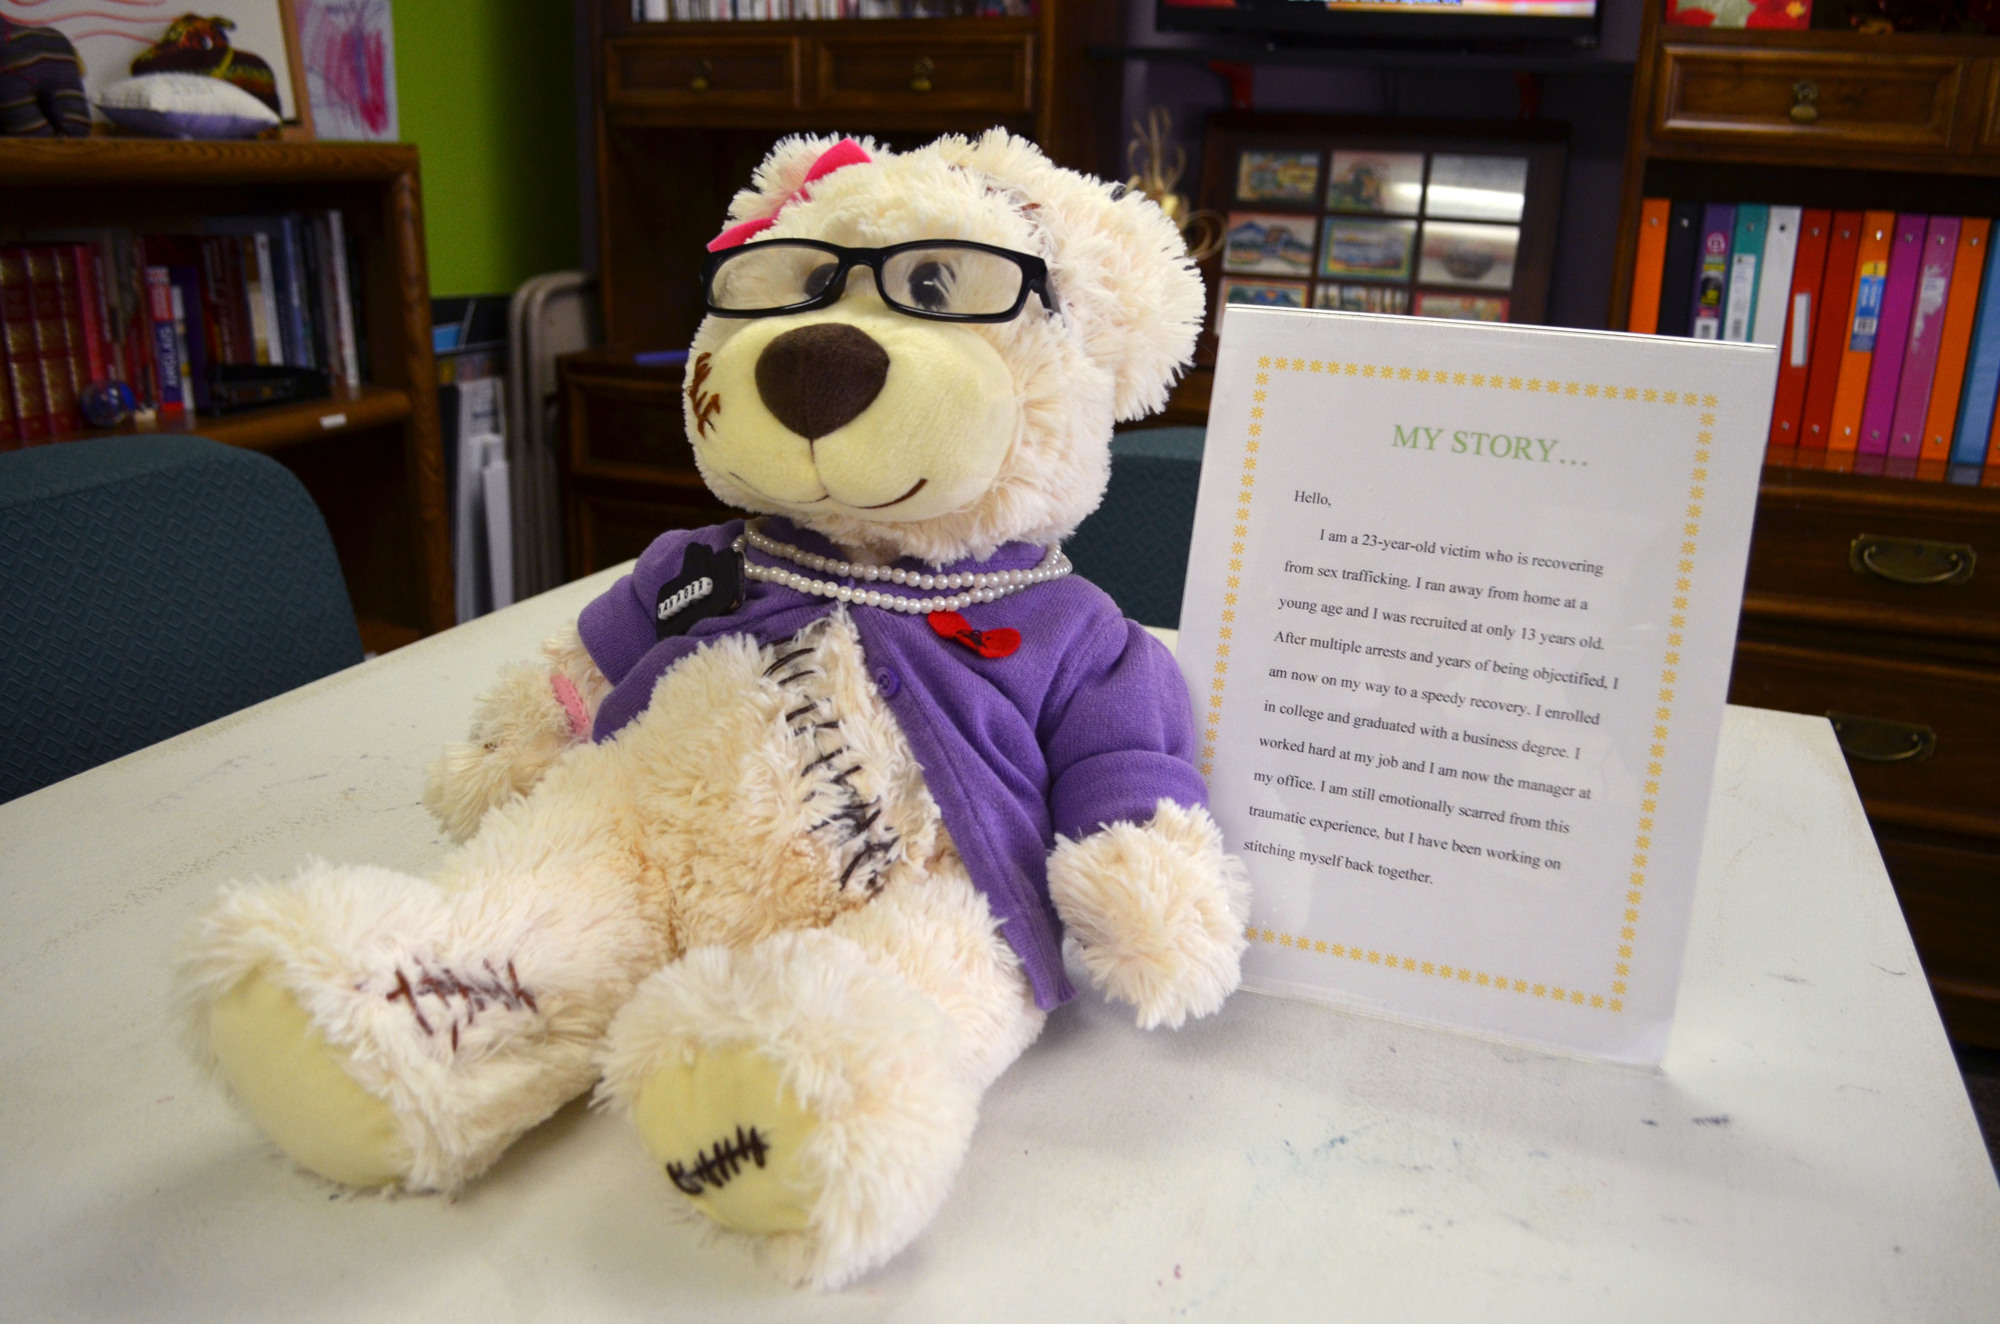 This teddy bear, designed by a student at Ringling College of Art and Design, symbolizes the transformation of a 23-year-old survivor who went from victim to college graduate to manager of her office. Photo by Niki Kottmann